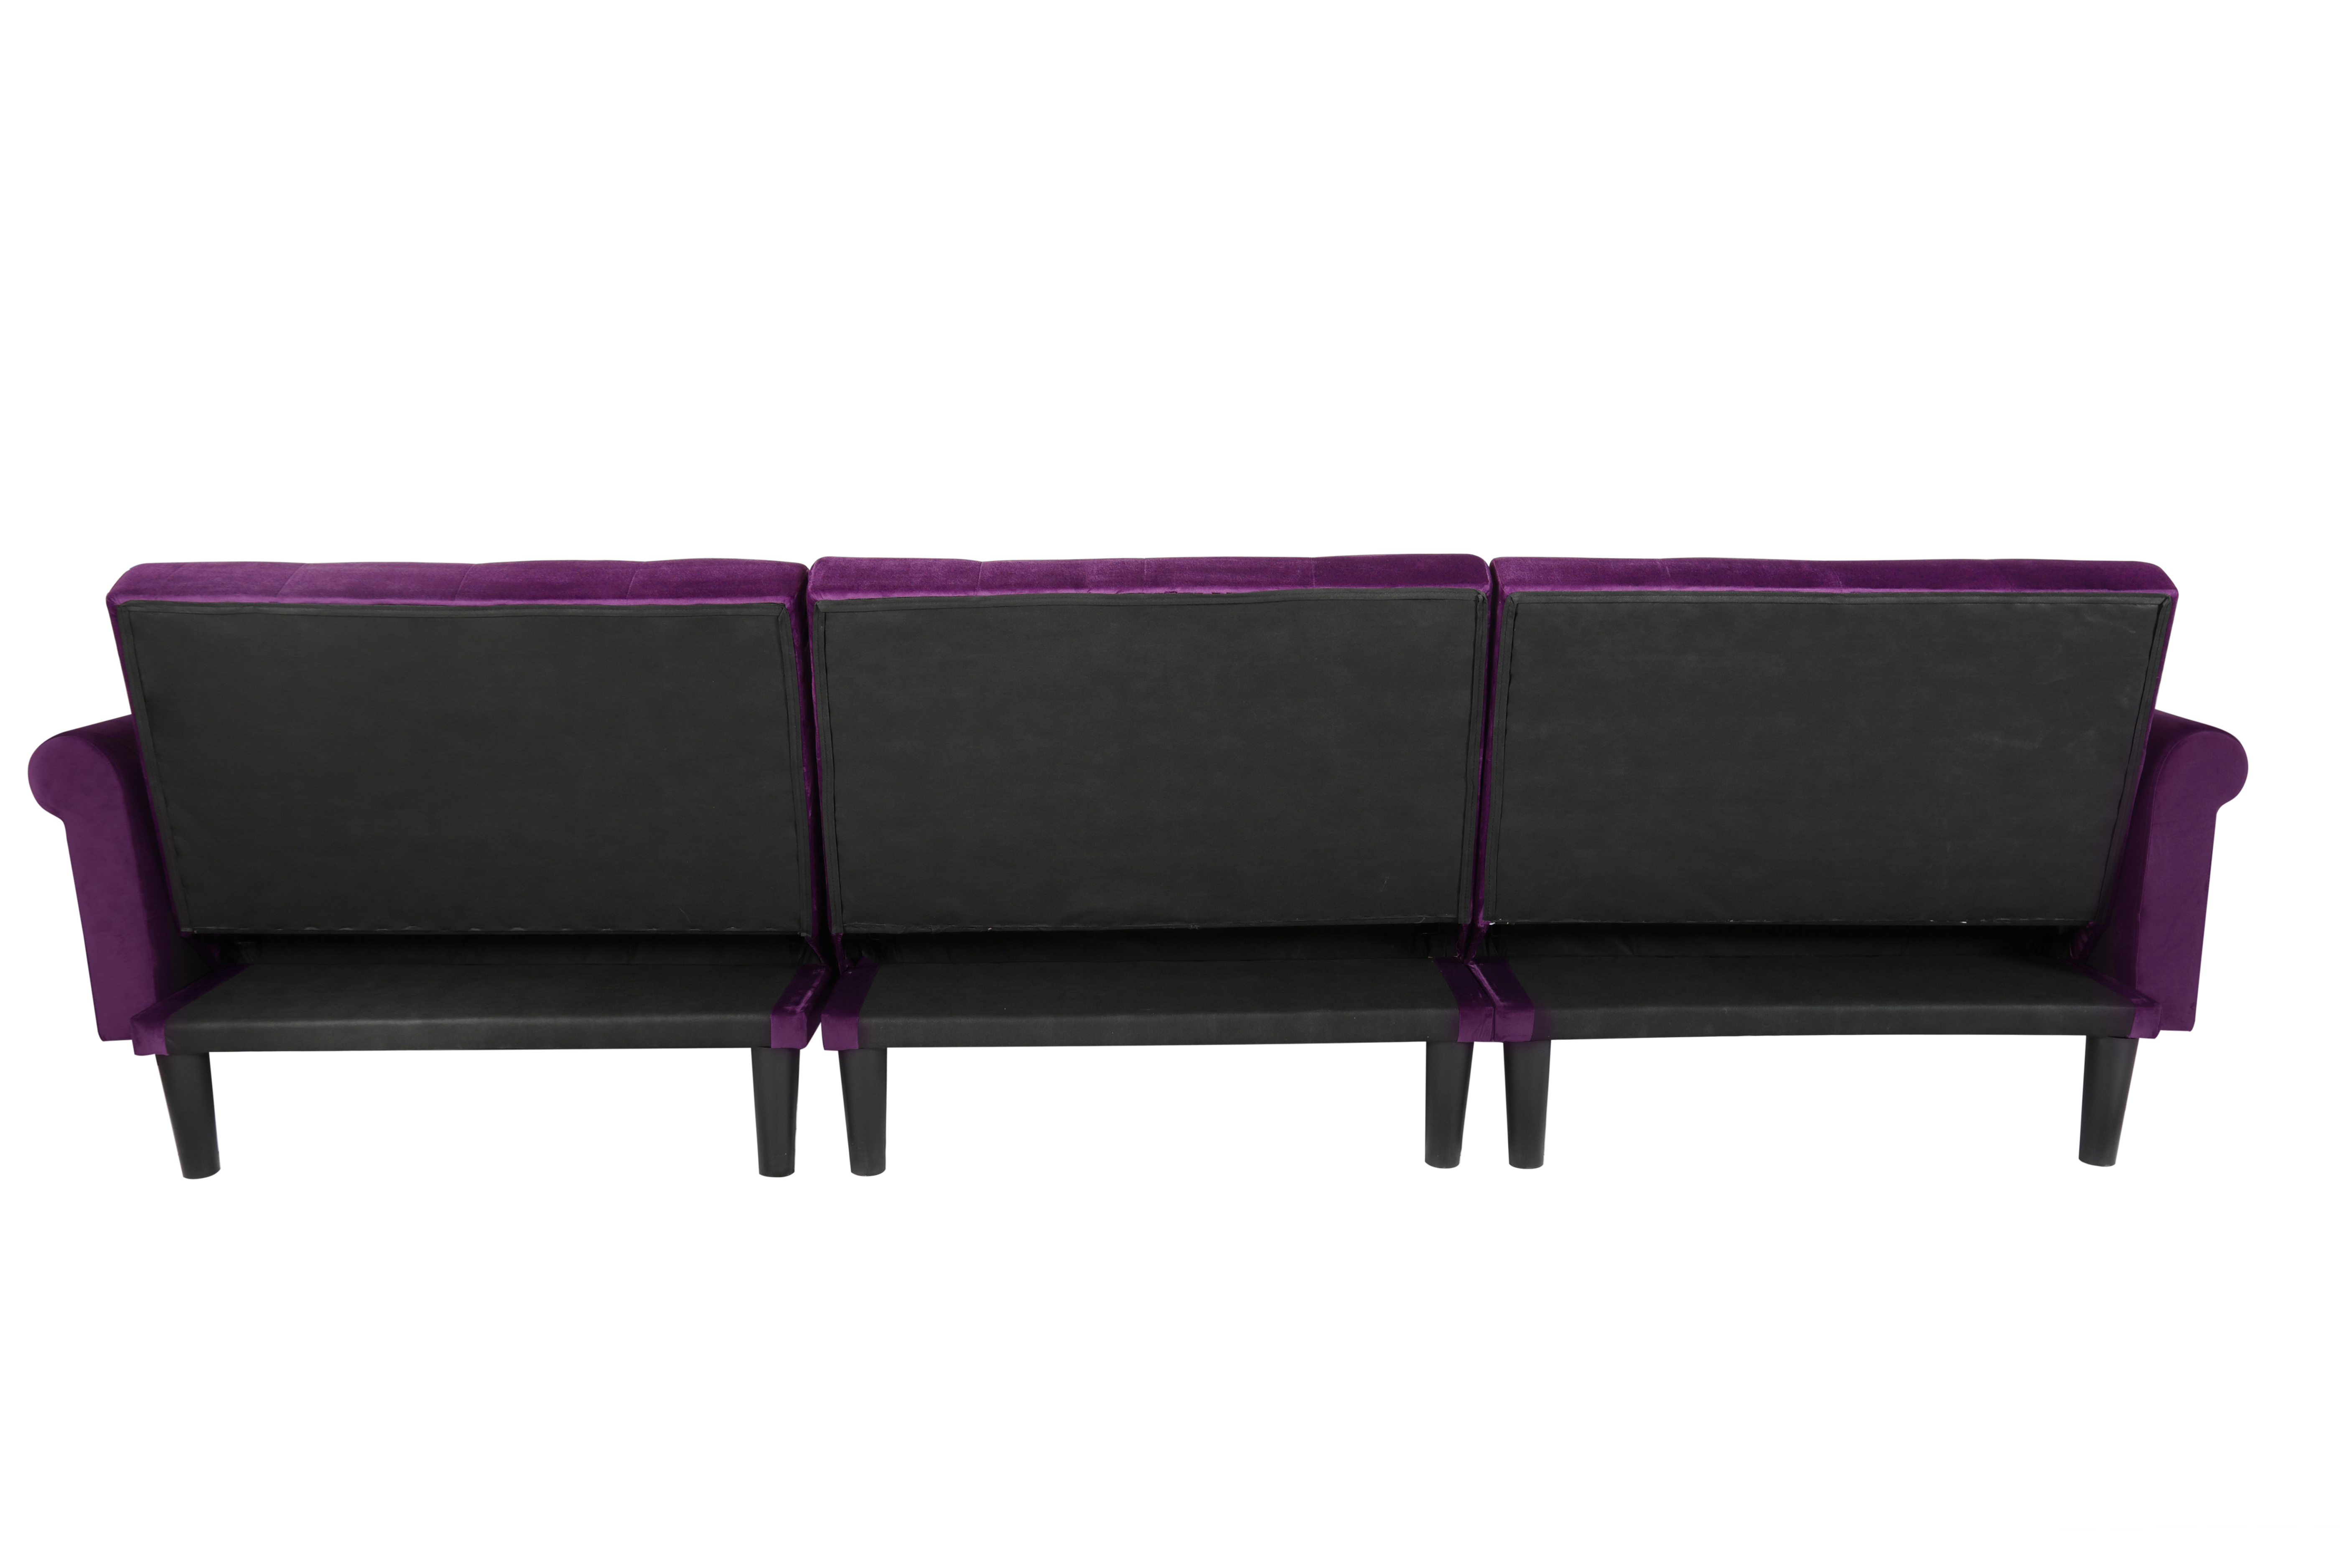 Purple L Style Sofa For Living Room Comfortable Home Furniture Sofa Bed Chaise Lounge Sofa Furniture